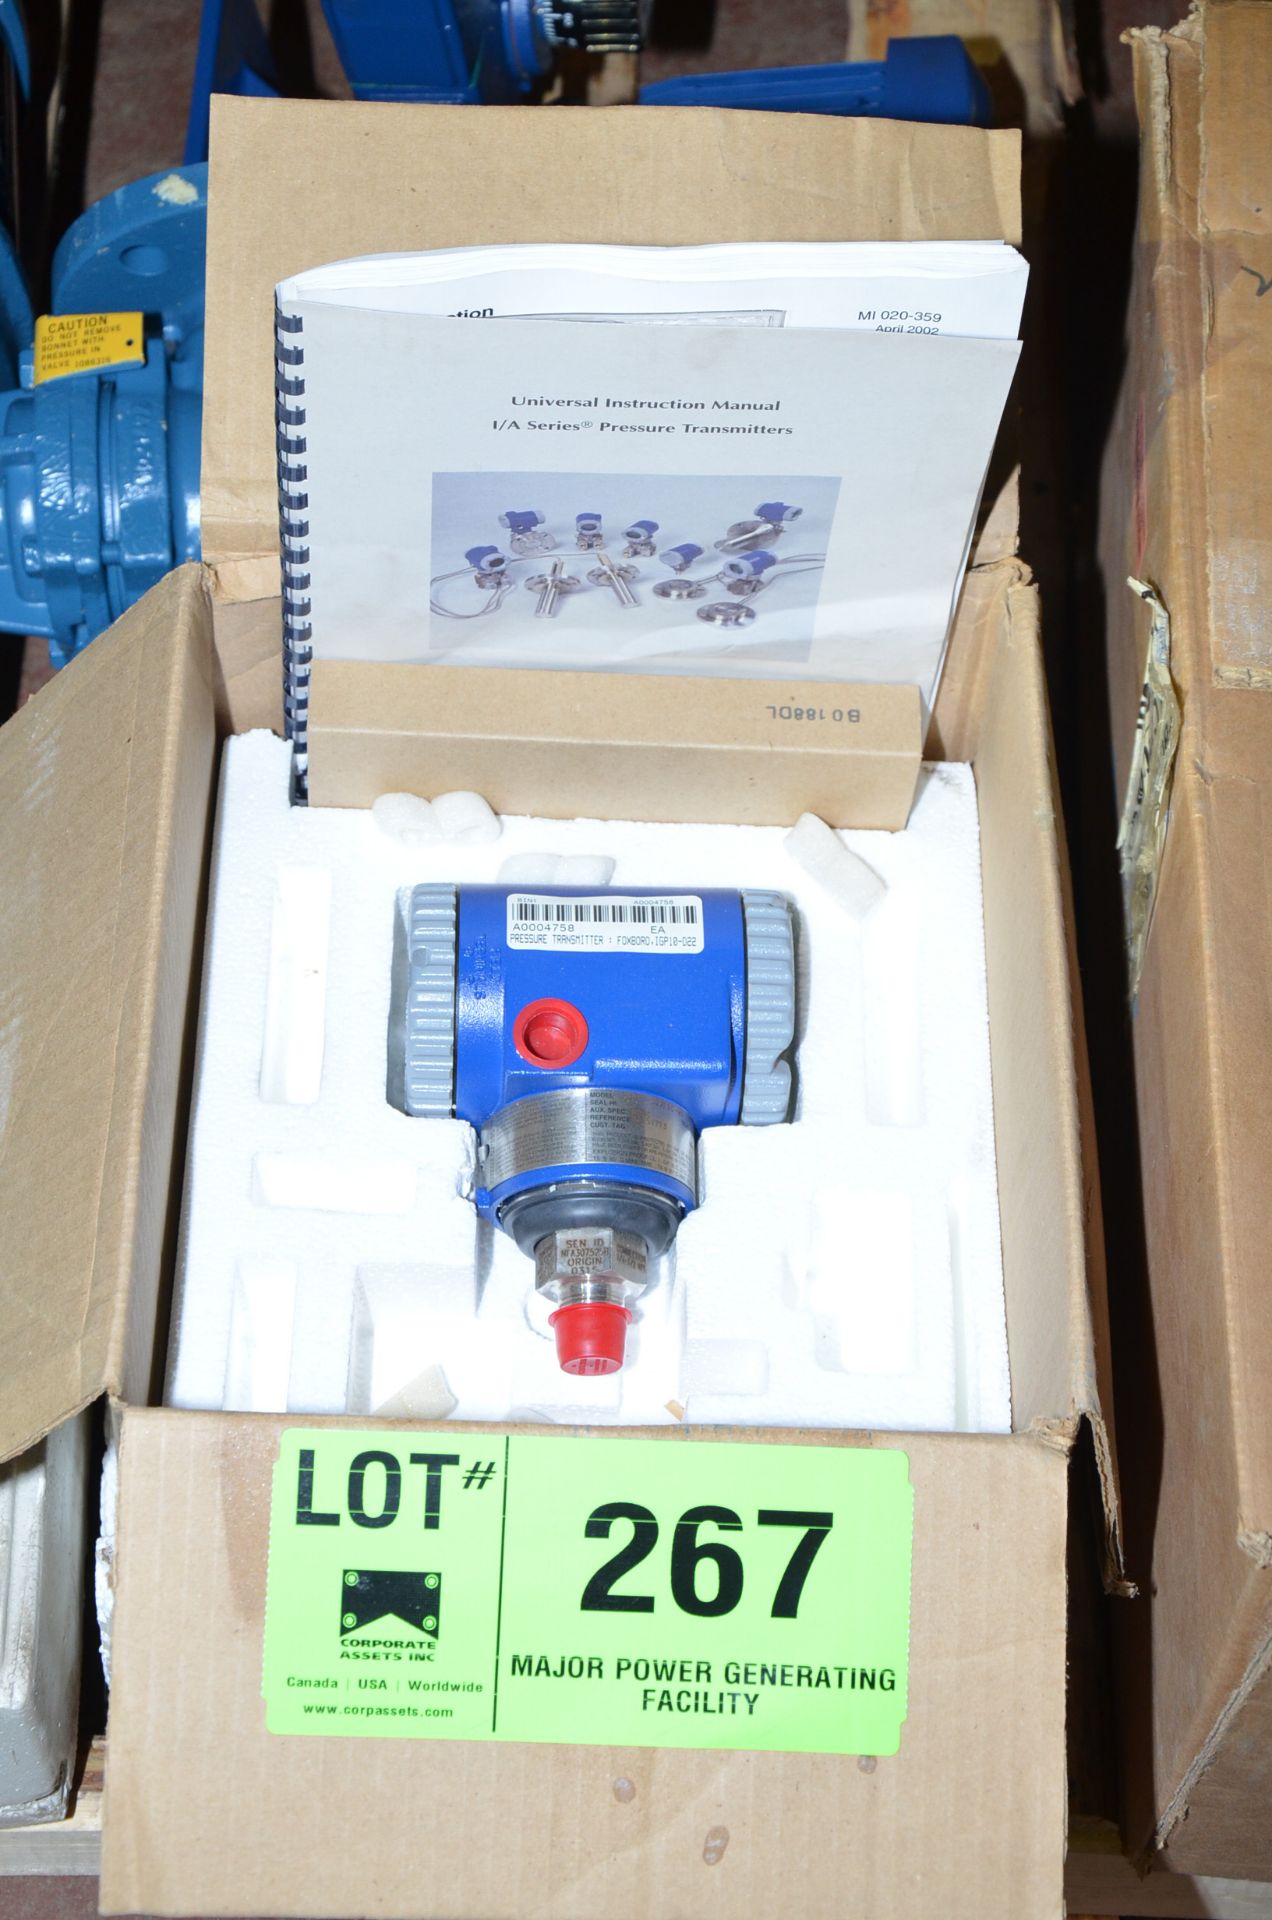 FOXBORO IGP10-022 DIGITAL PRESSURE TRANSMITTER [RIGGING FEE FOR LOT #267 - $25 USD PLUS APPLICABLE